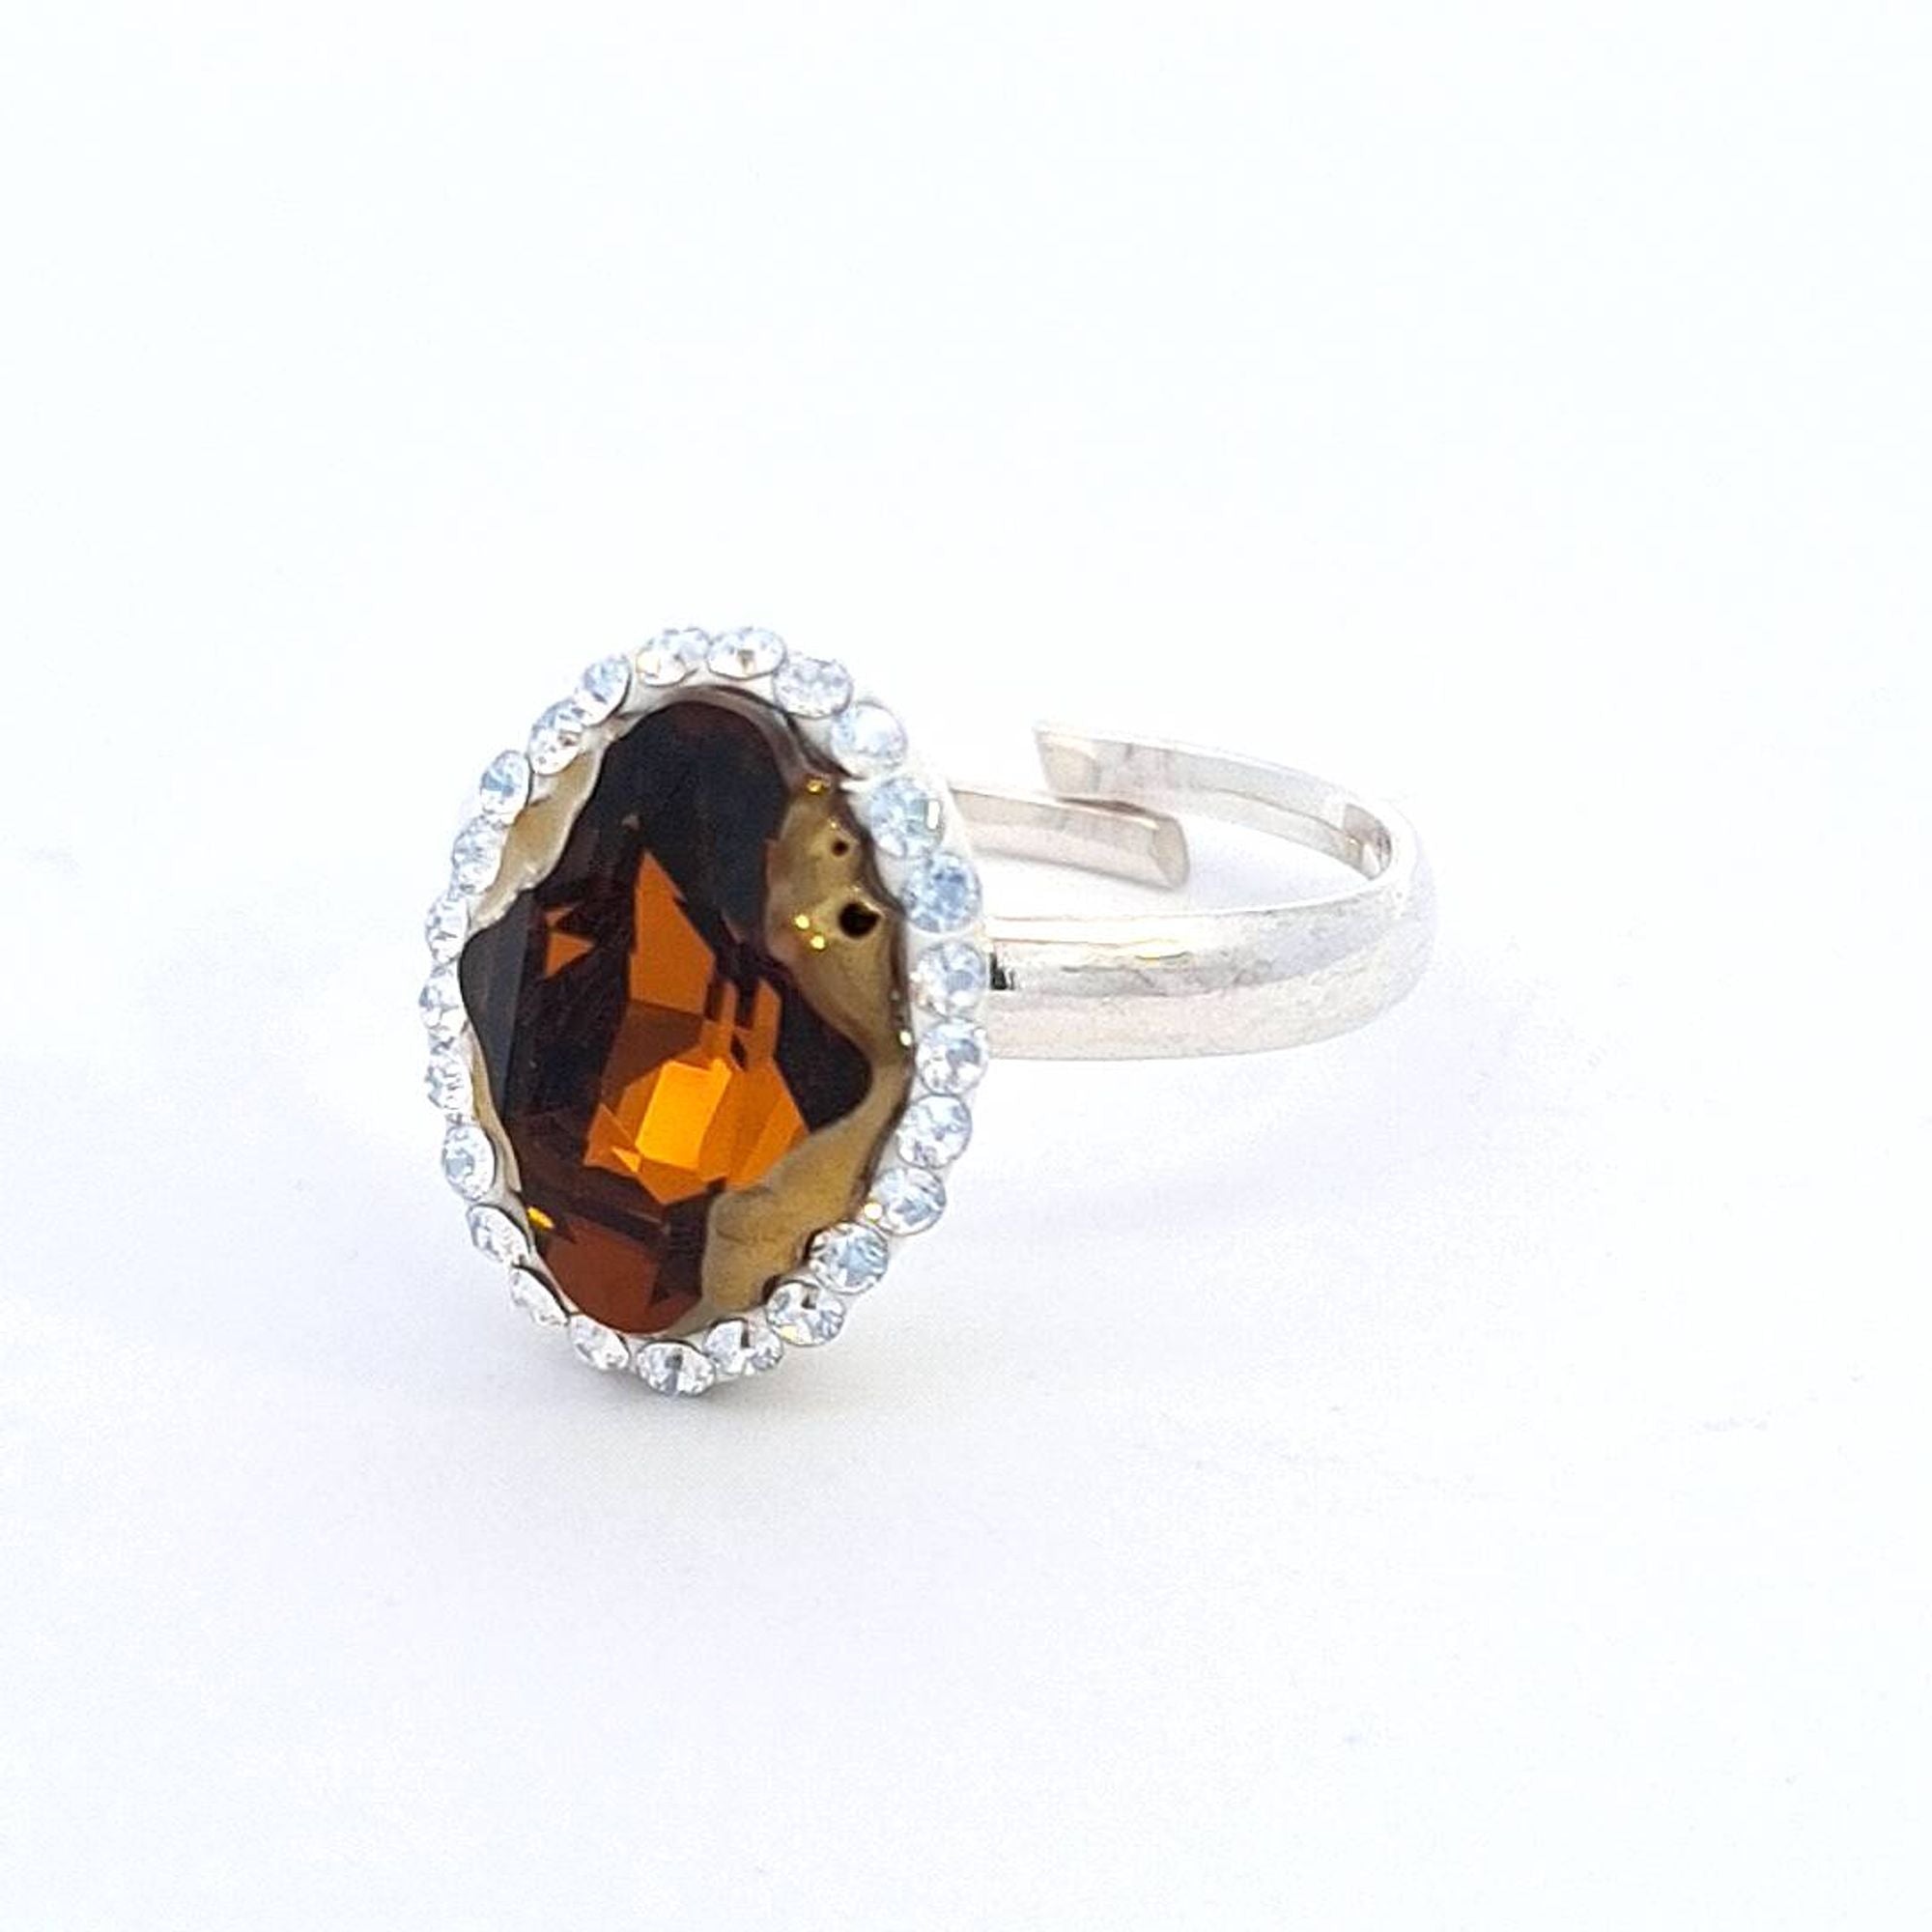 Magpie Gems' Tribe Crystal Amber Aura Halo Ring in Sterling Silver, showcasing an Austrian Tribe crystal., side view